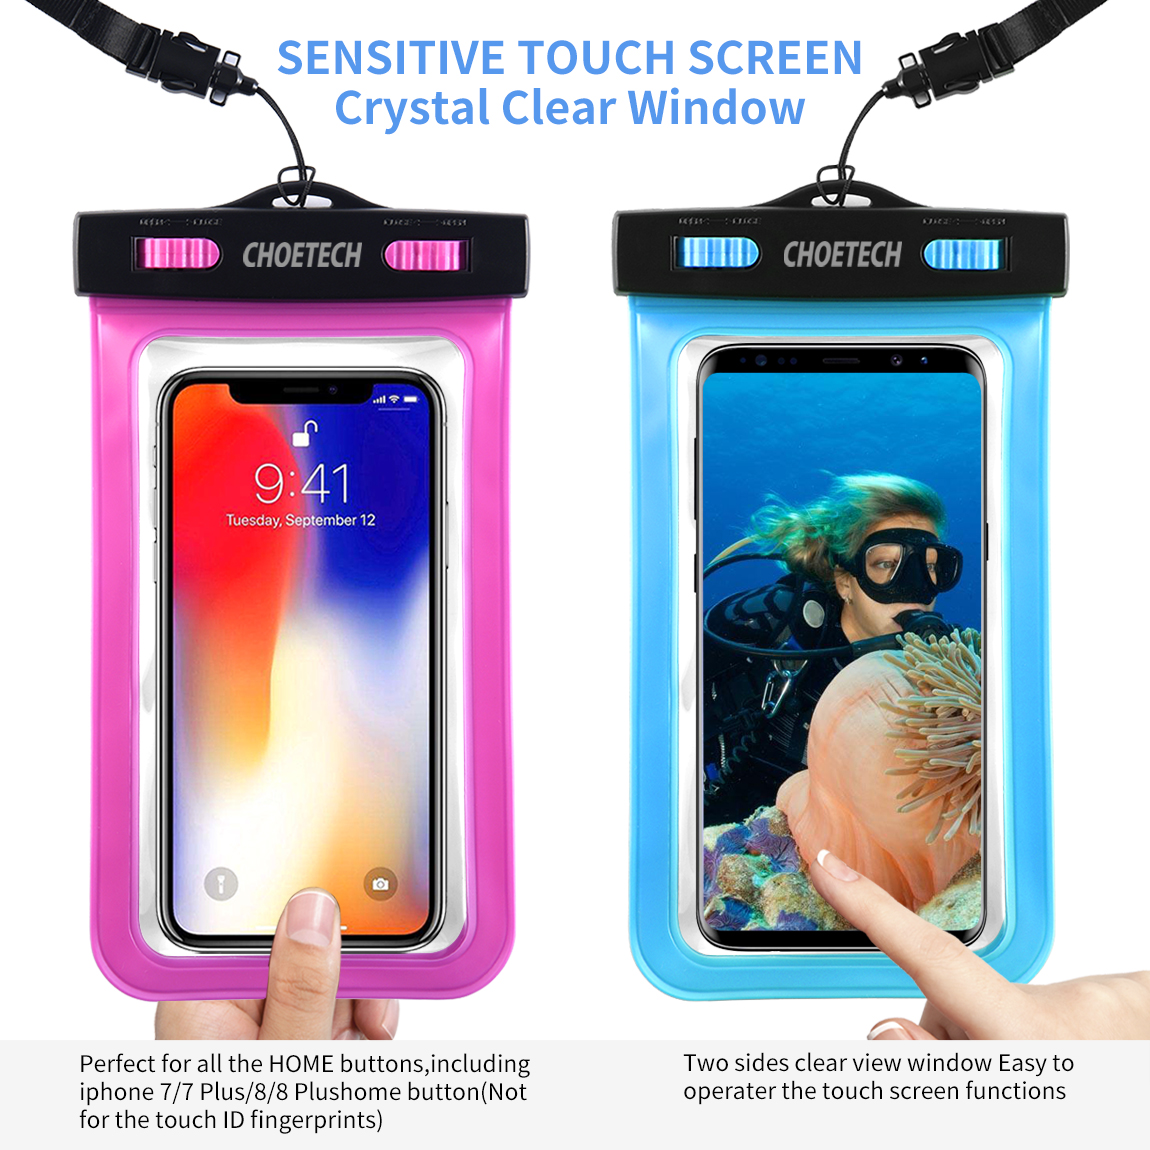 CHOETECH-Swimming-Diving-PVC-Touch-Screen-Clear-IPX8-Waterproof-Phone-Bag-Phone-Pouch-with-Strap-for-1679568-8